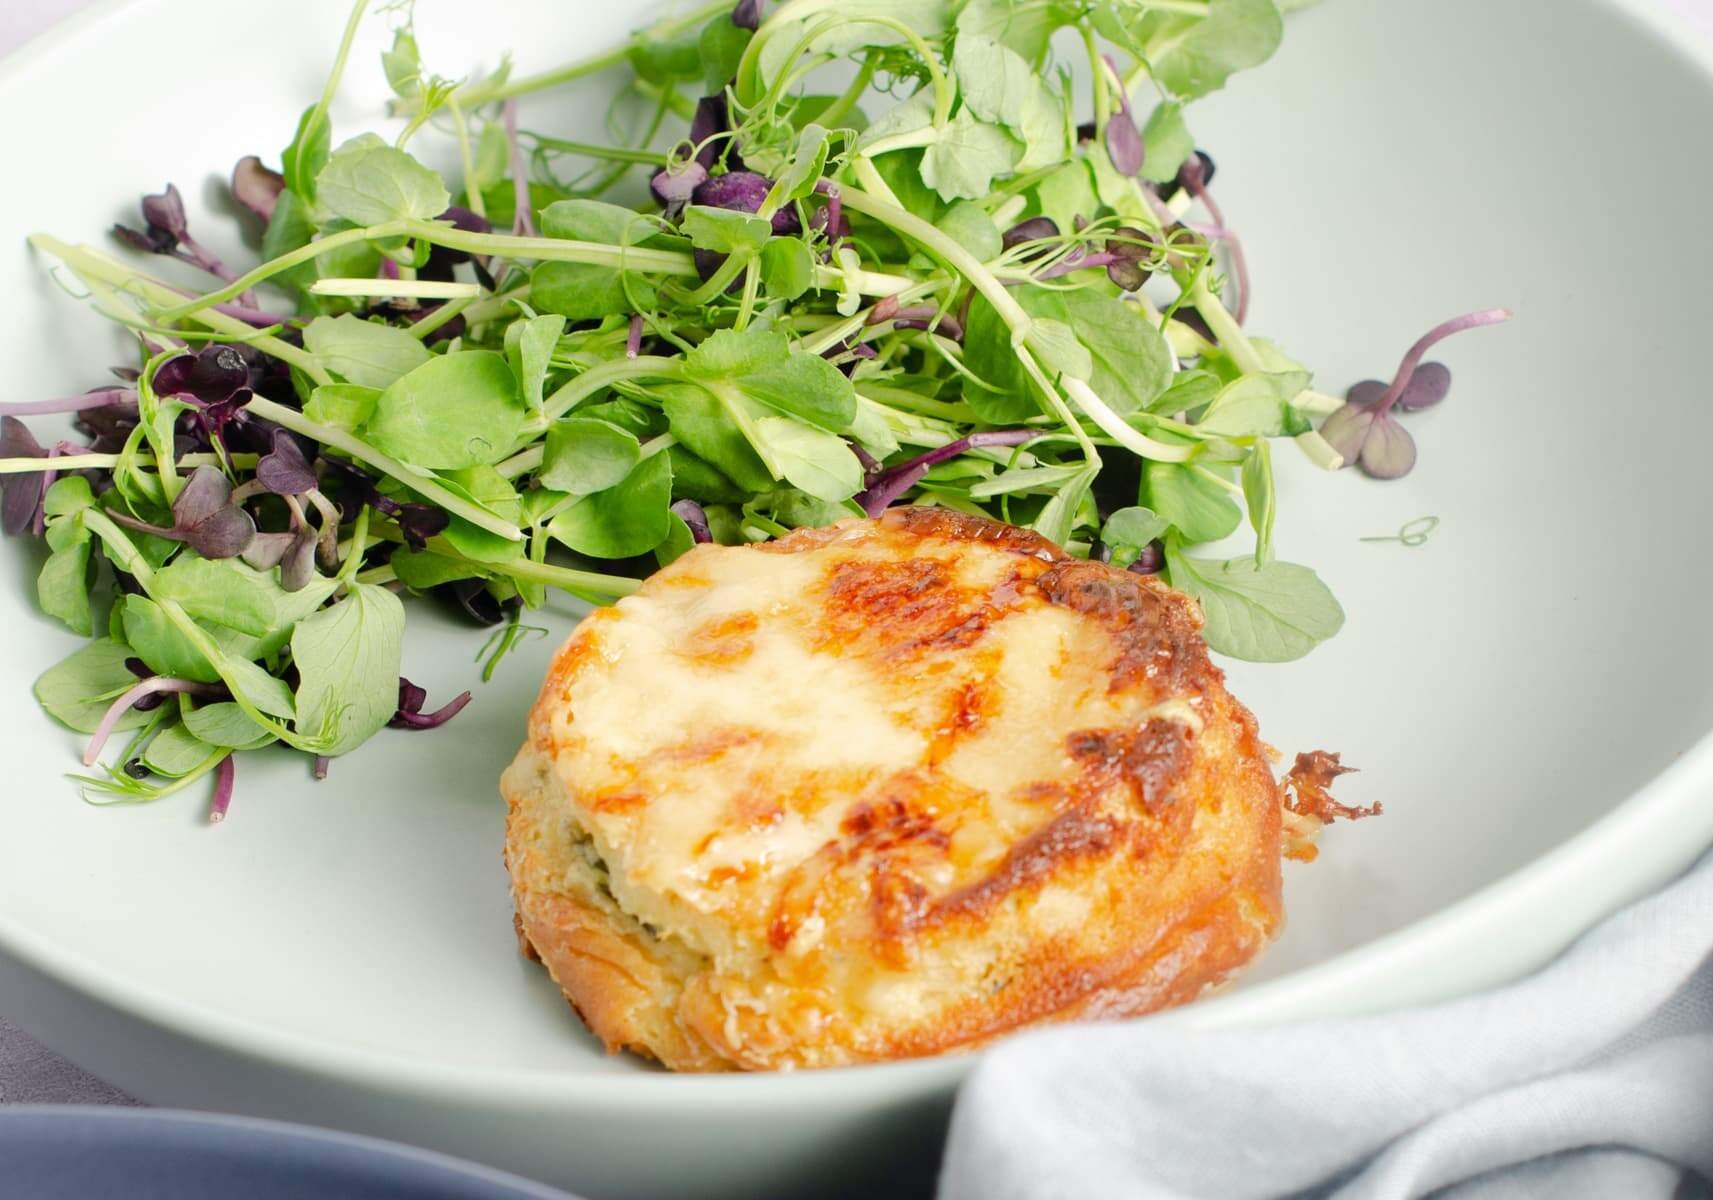 A twice baked cheese souffle fresh from the oven served on a pale green plate with a green salad.